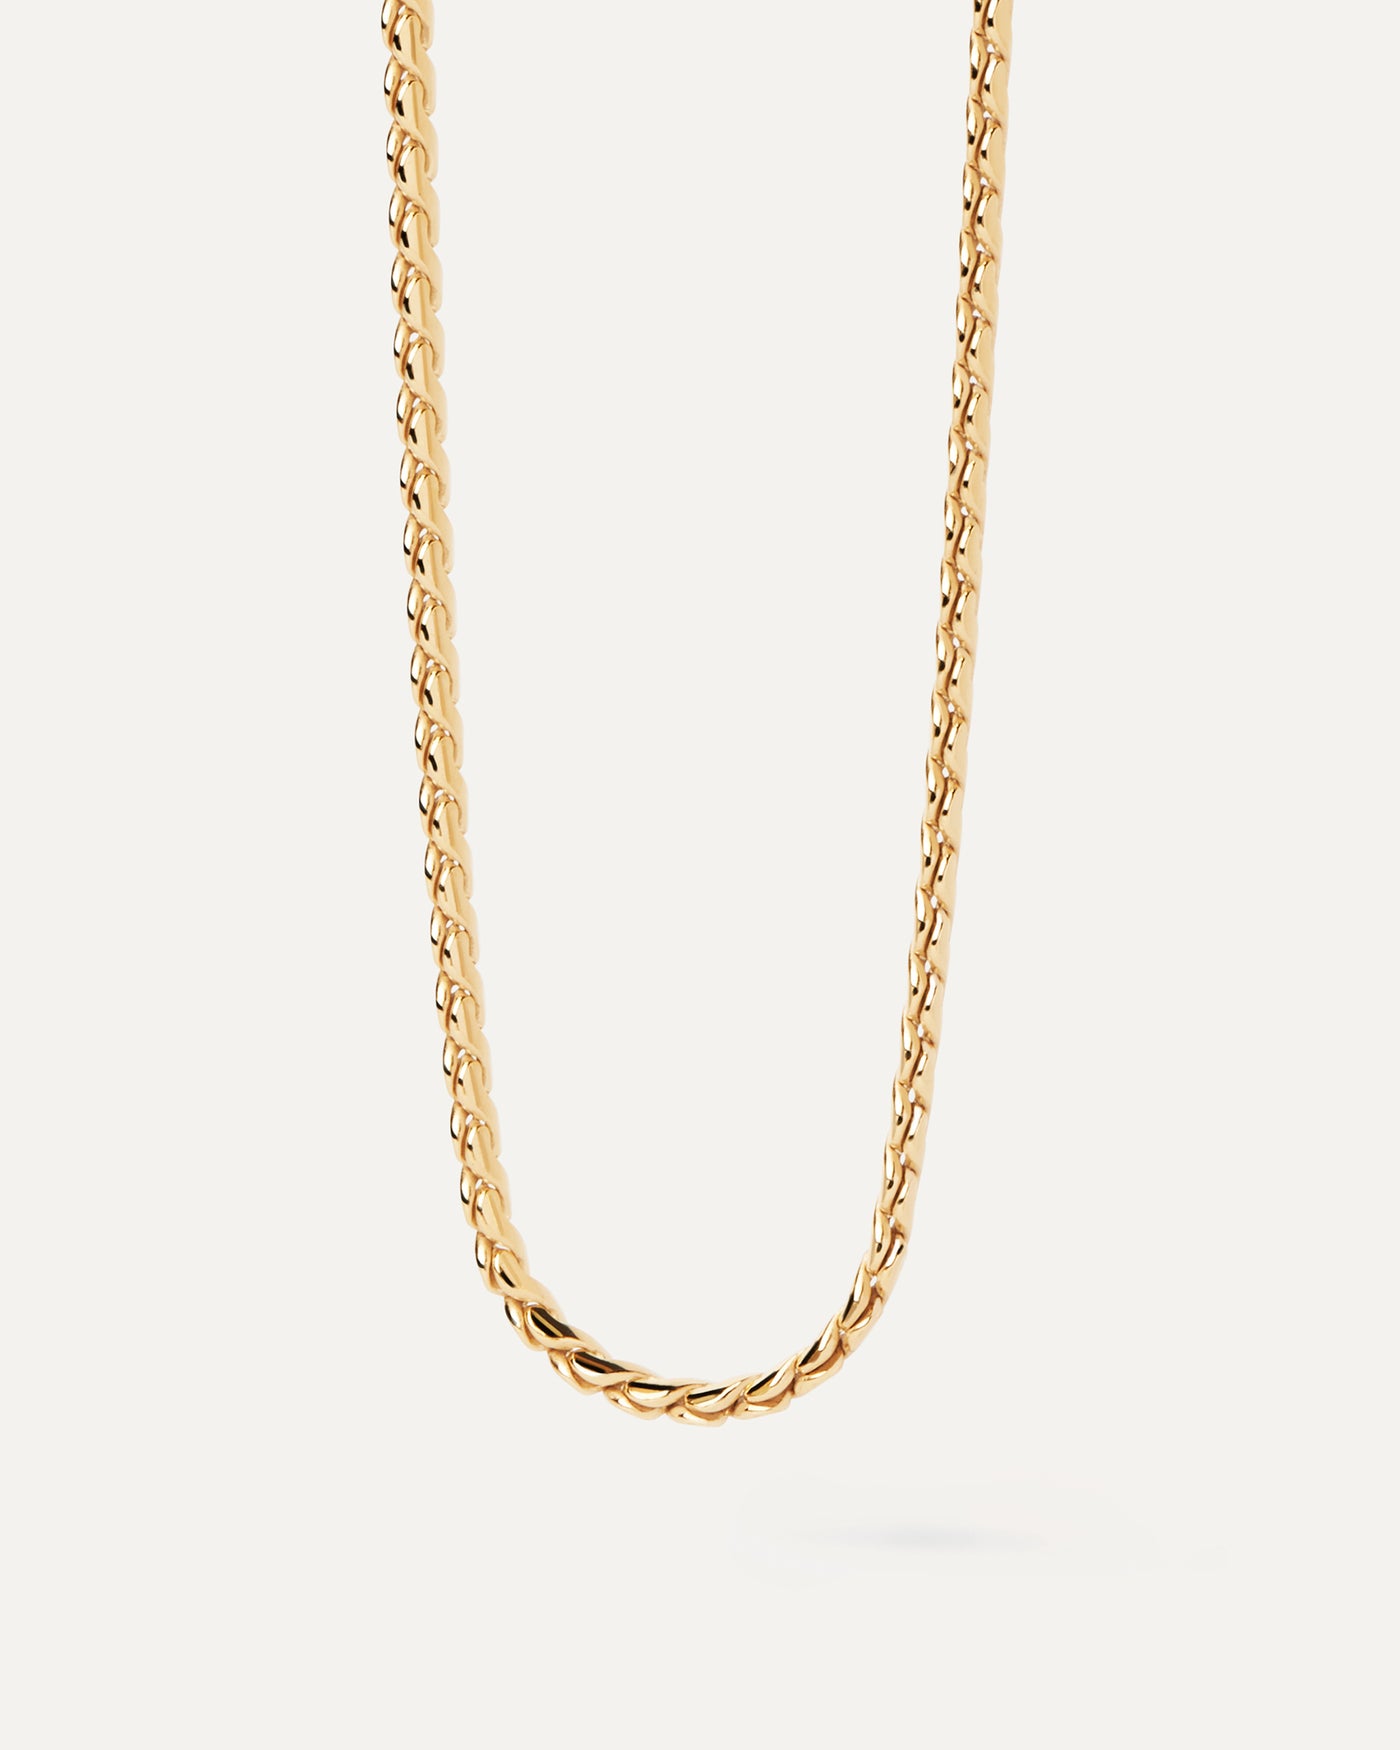 GOLD SERPENTINE NECKLACE – Ruby Star